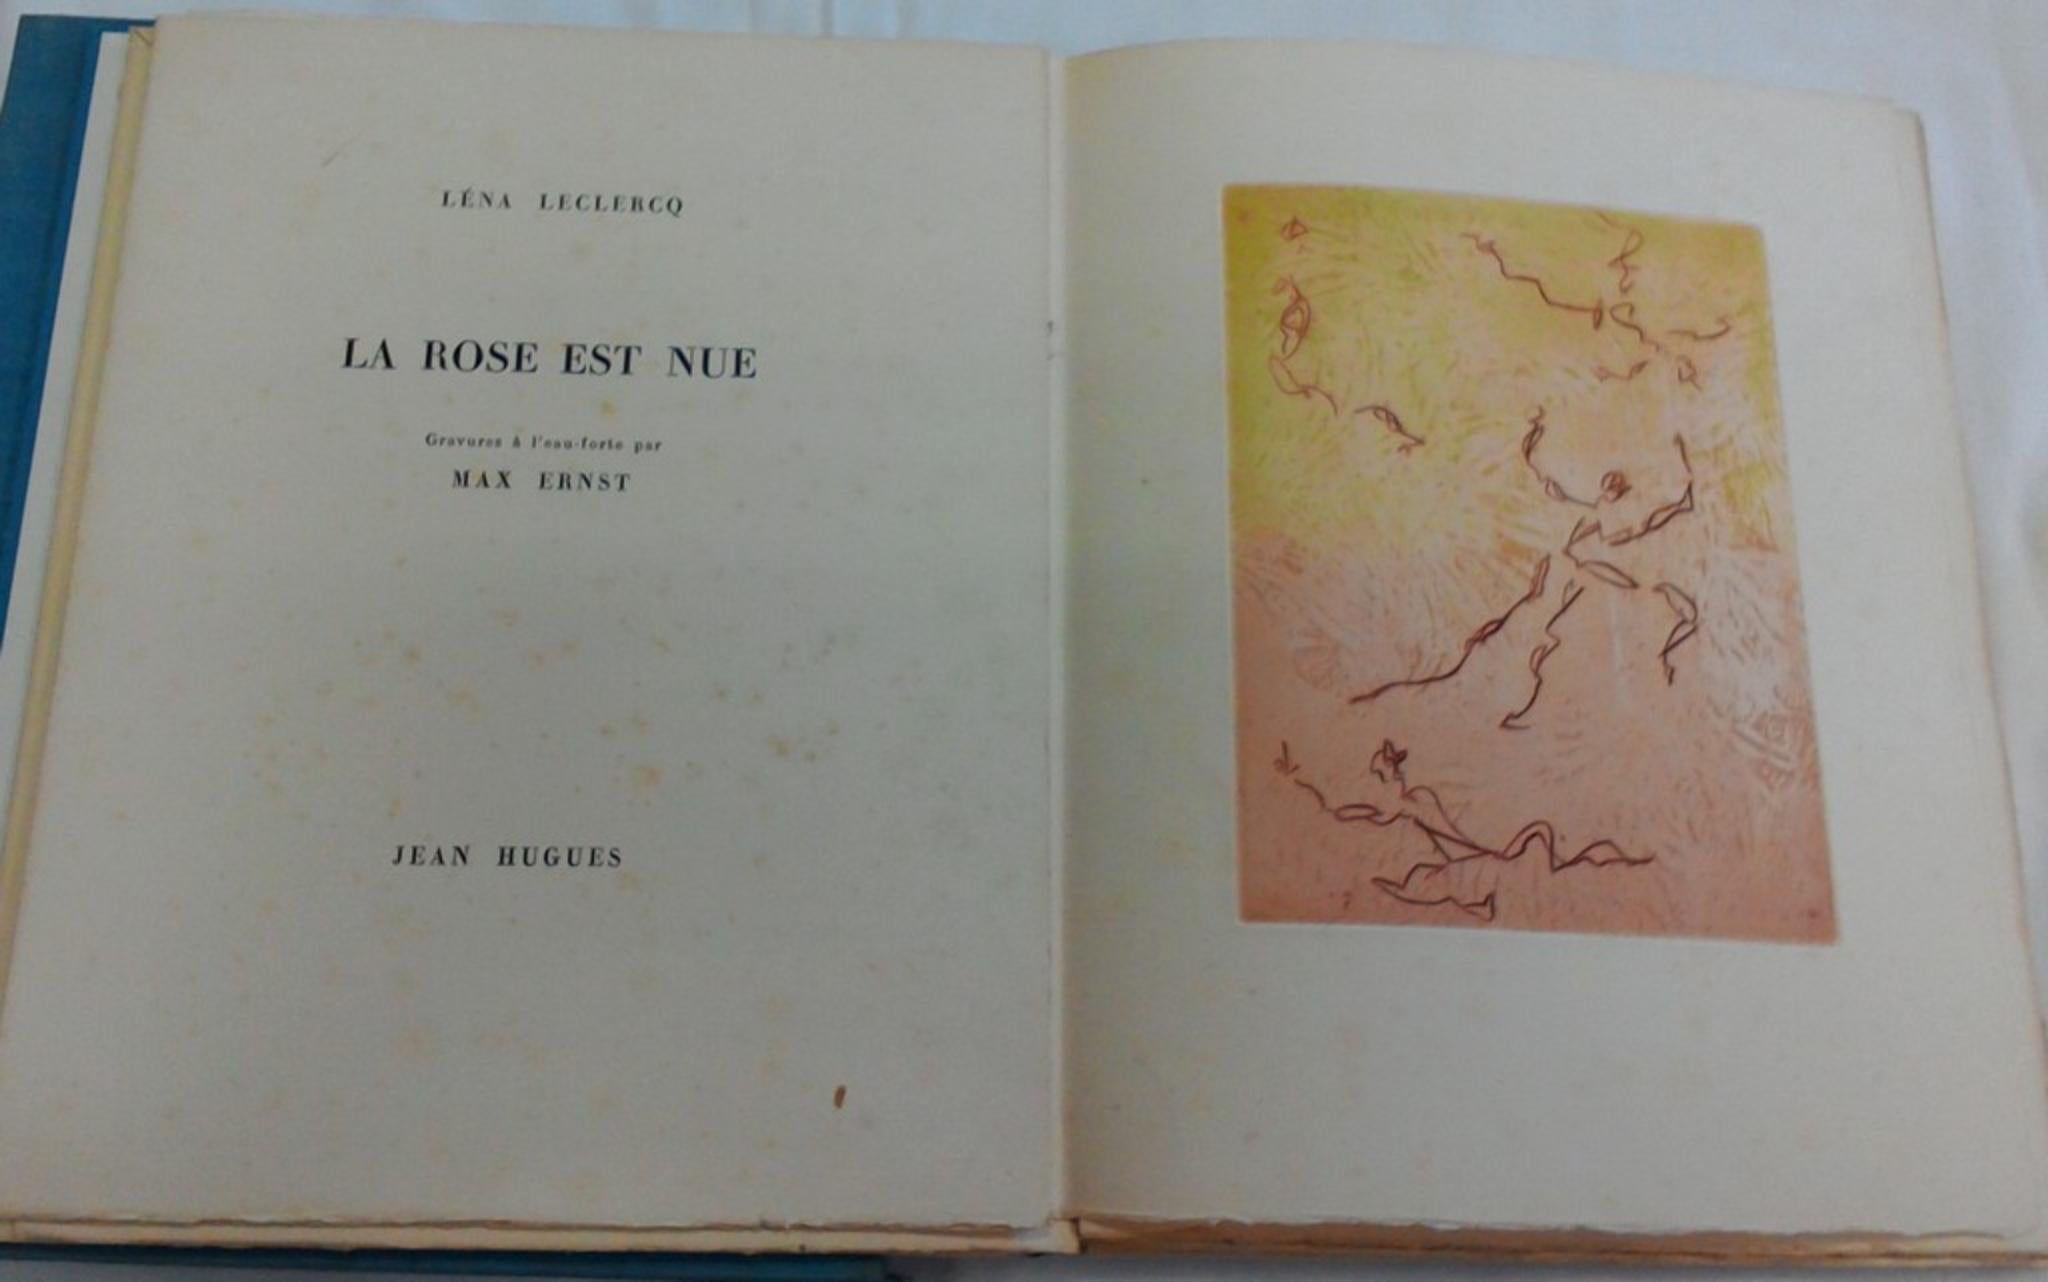 Le Rose est Nue - Rare Book Illustrated by Max Ernst  - 1960 - Art by Max Ernst, Lena Leclercq, Jean Hugues